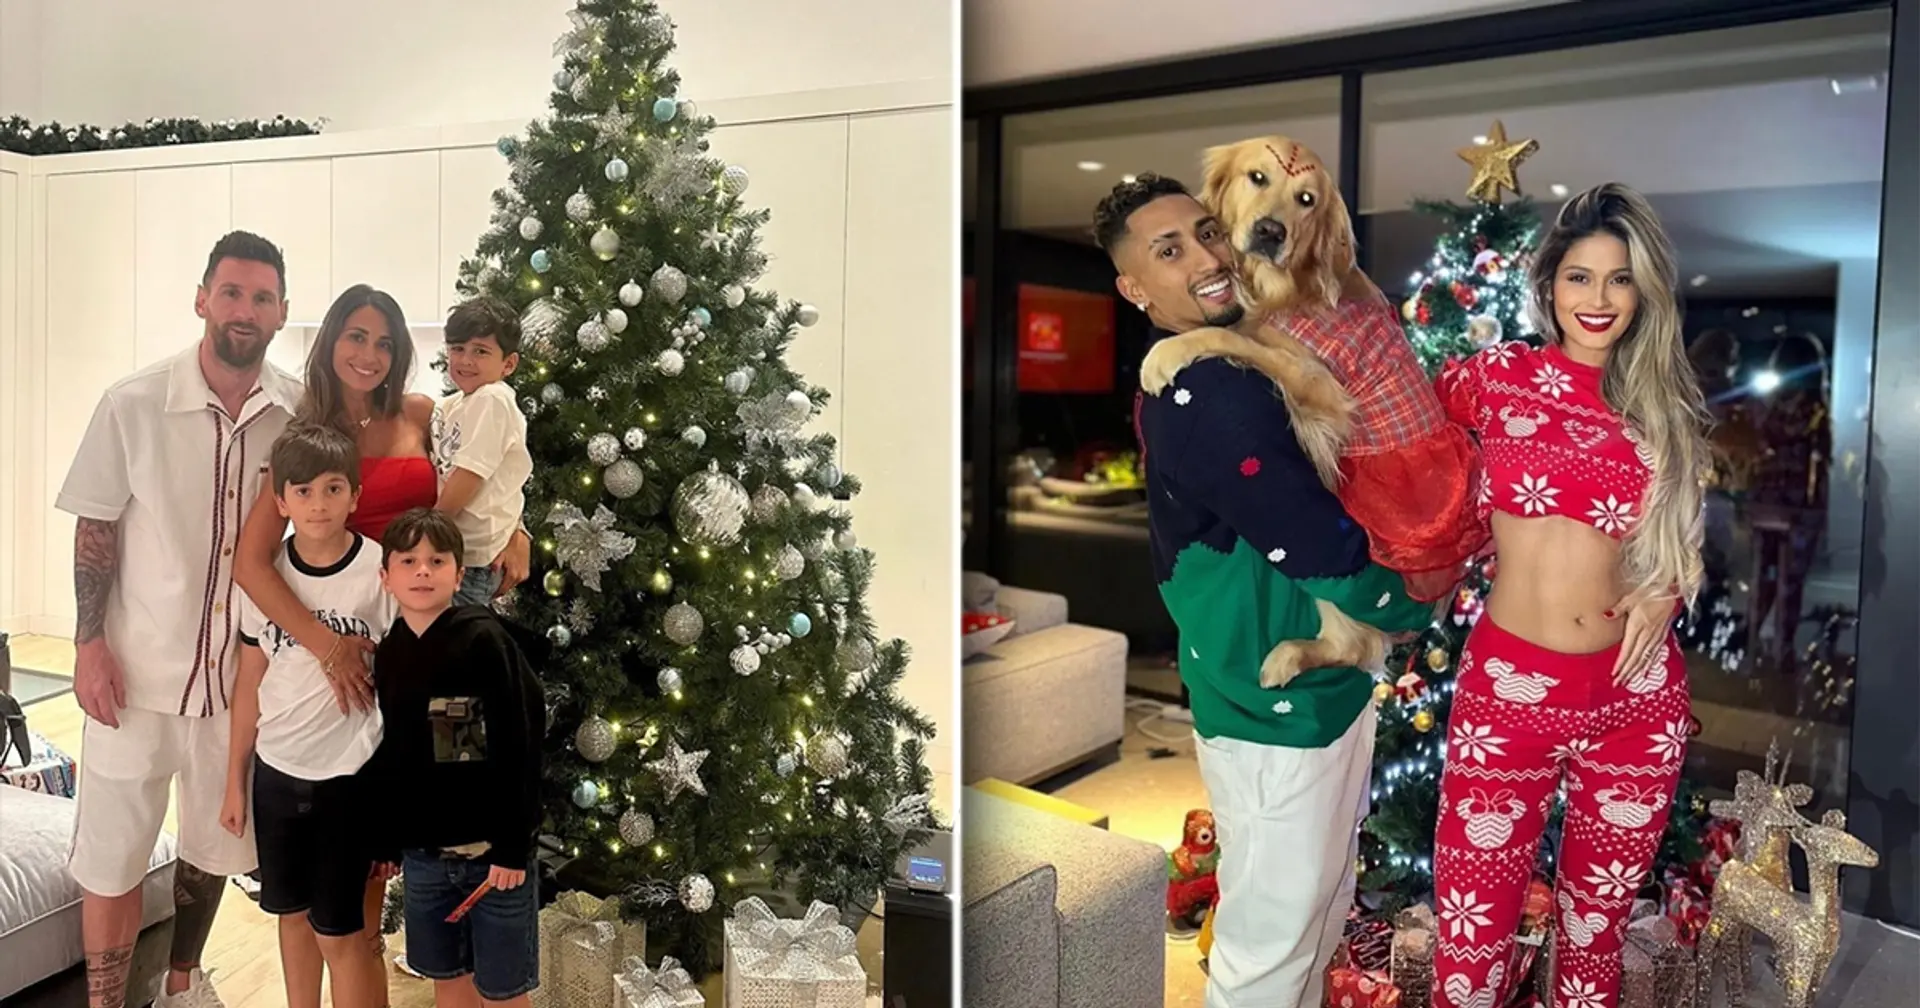 Messi, Iniesta and others: 11 best pics of Barca players and legends celebrating Christmas